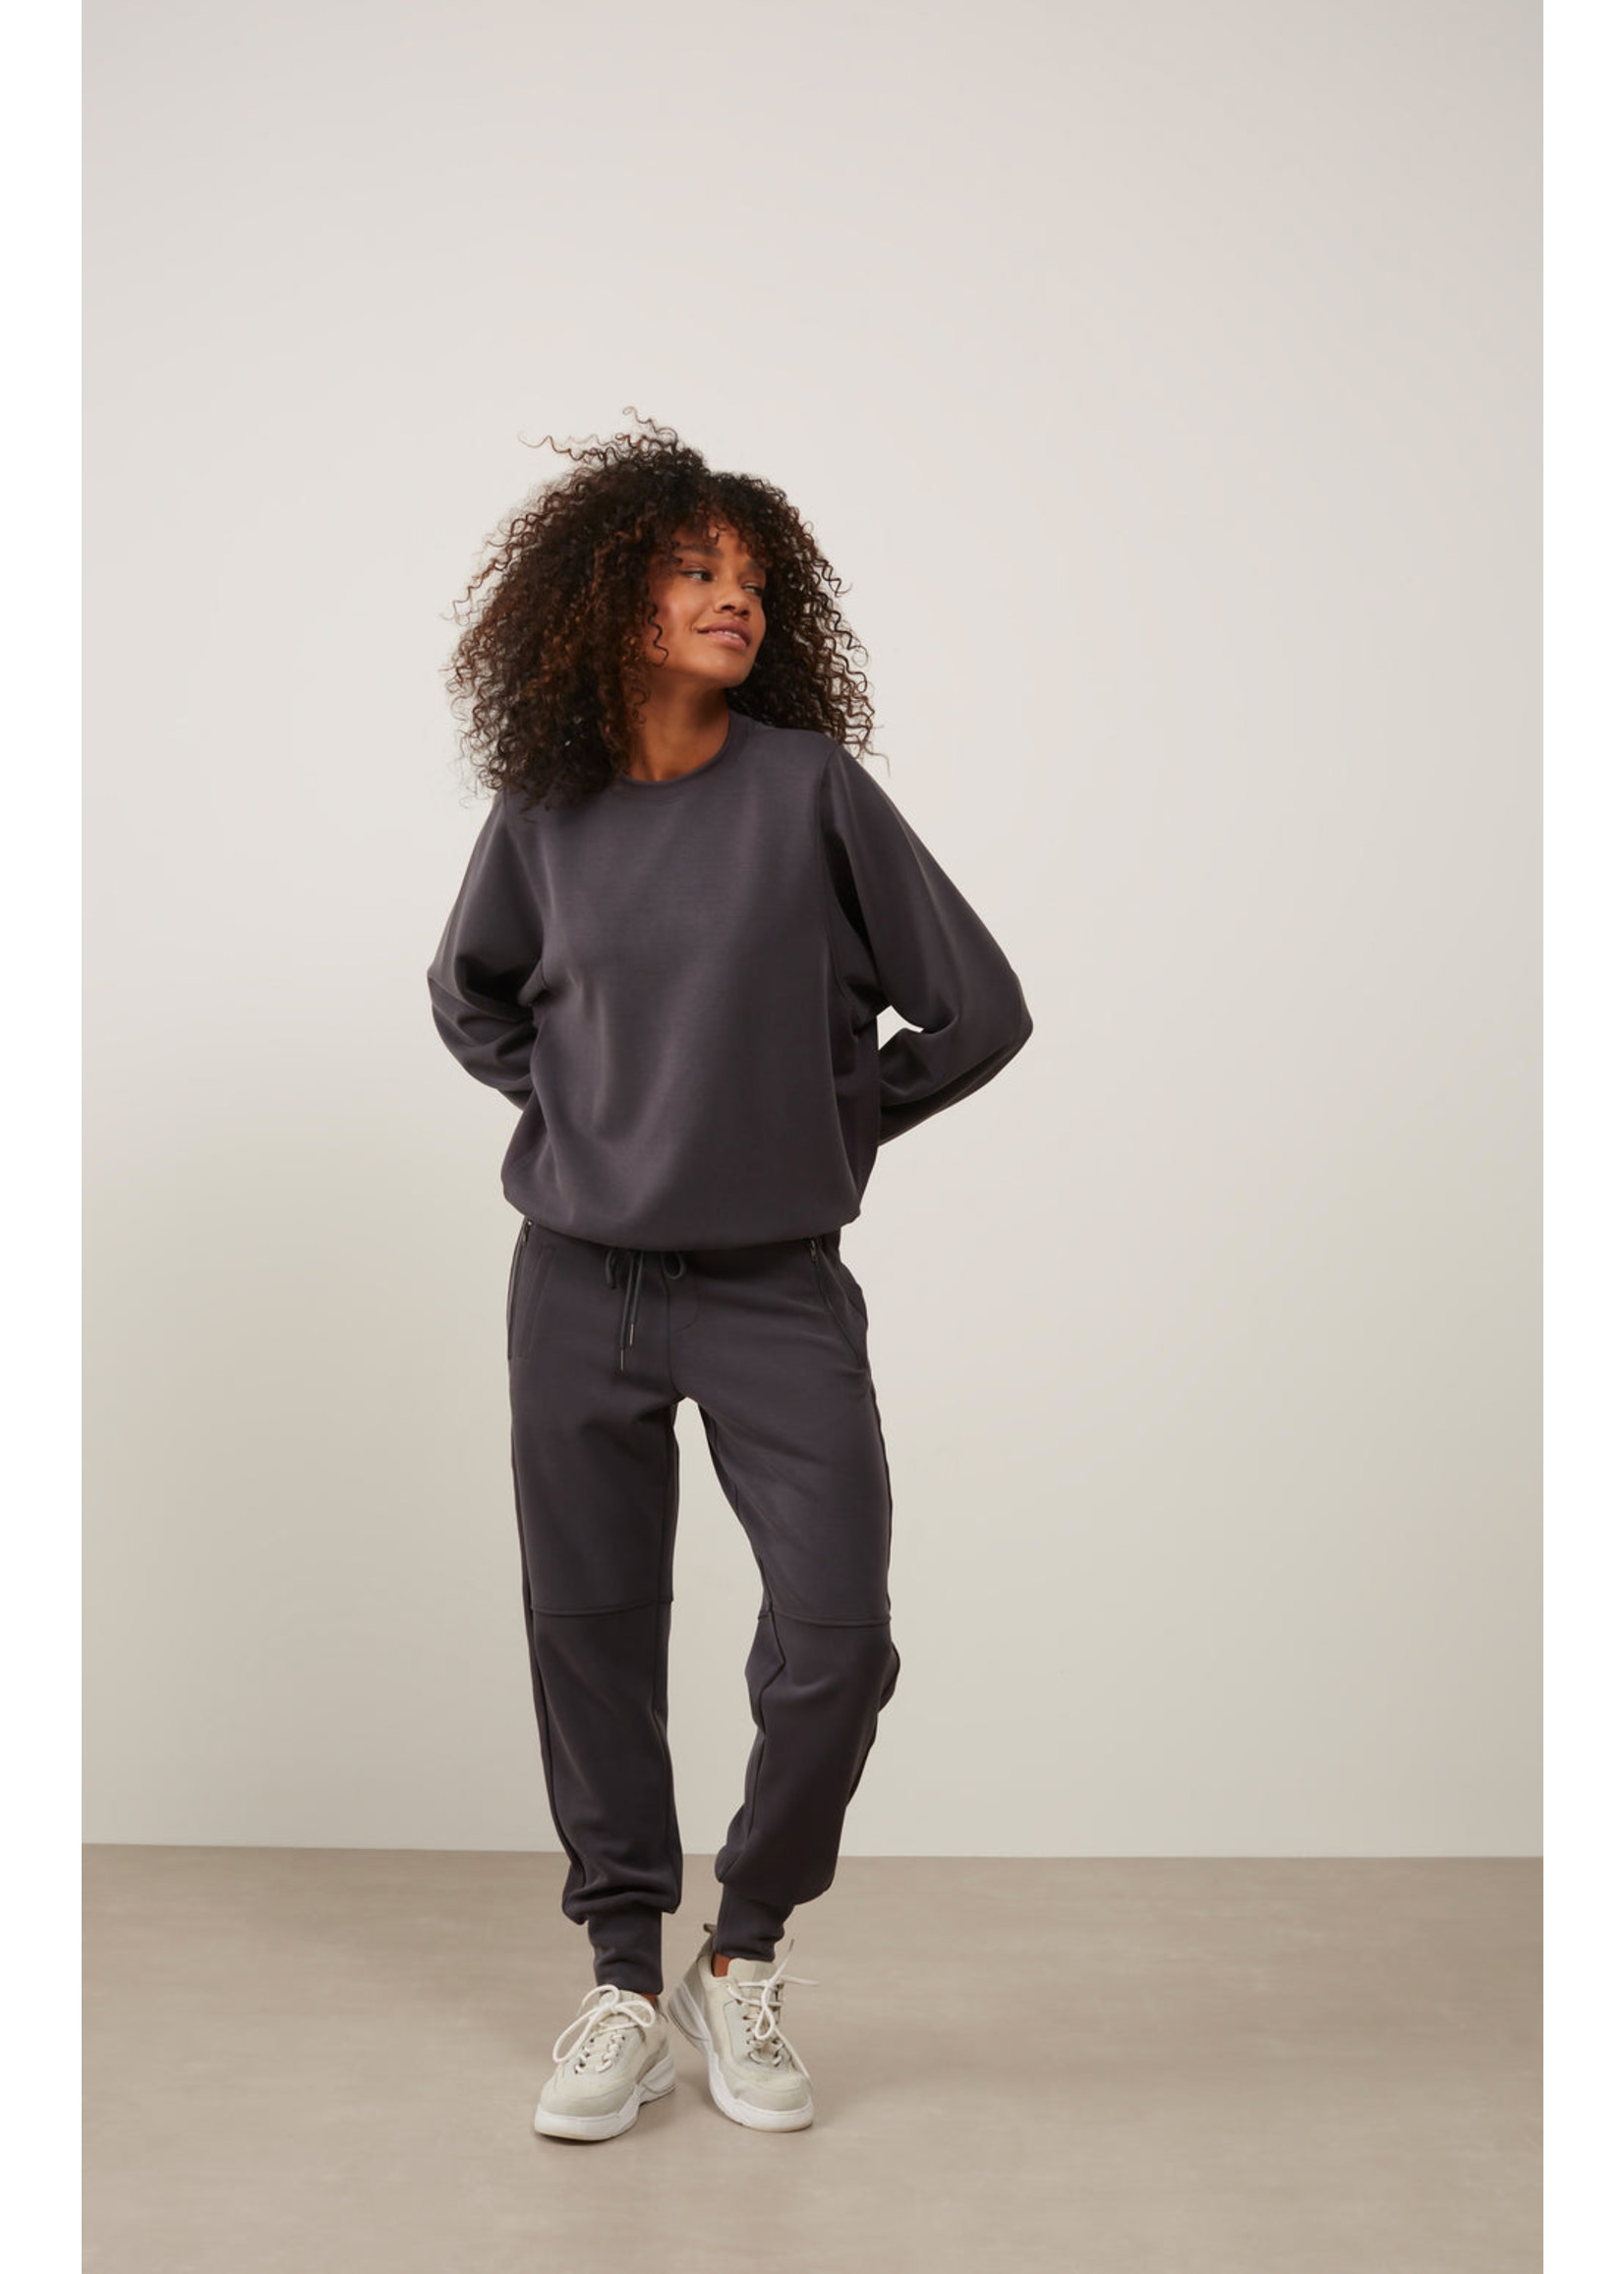 Yaya - Scuba Jogging trousers in a modal blend with zippers